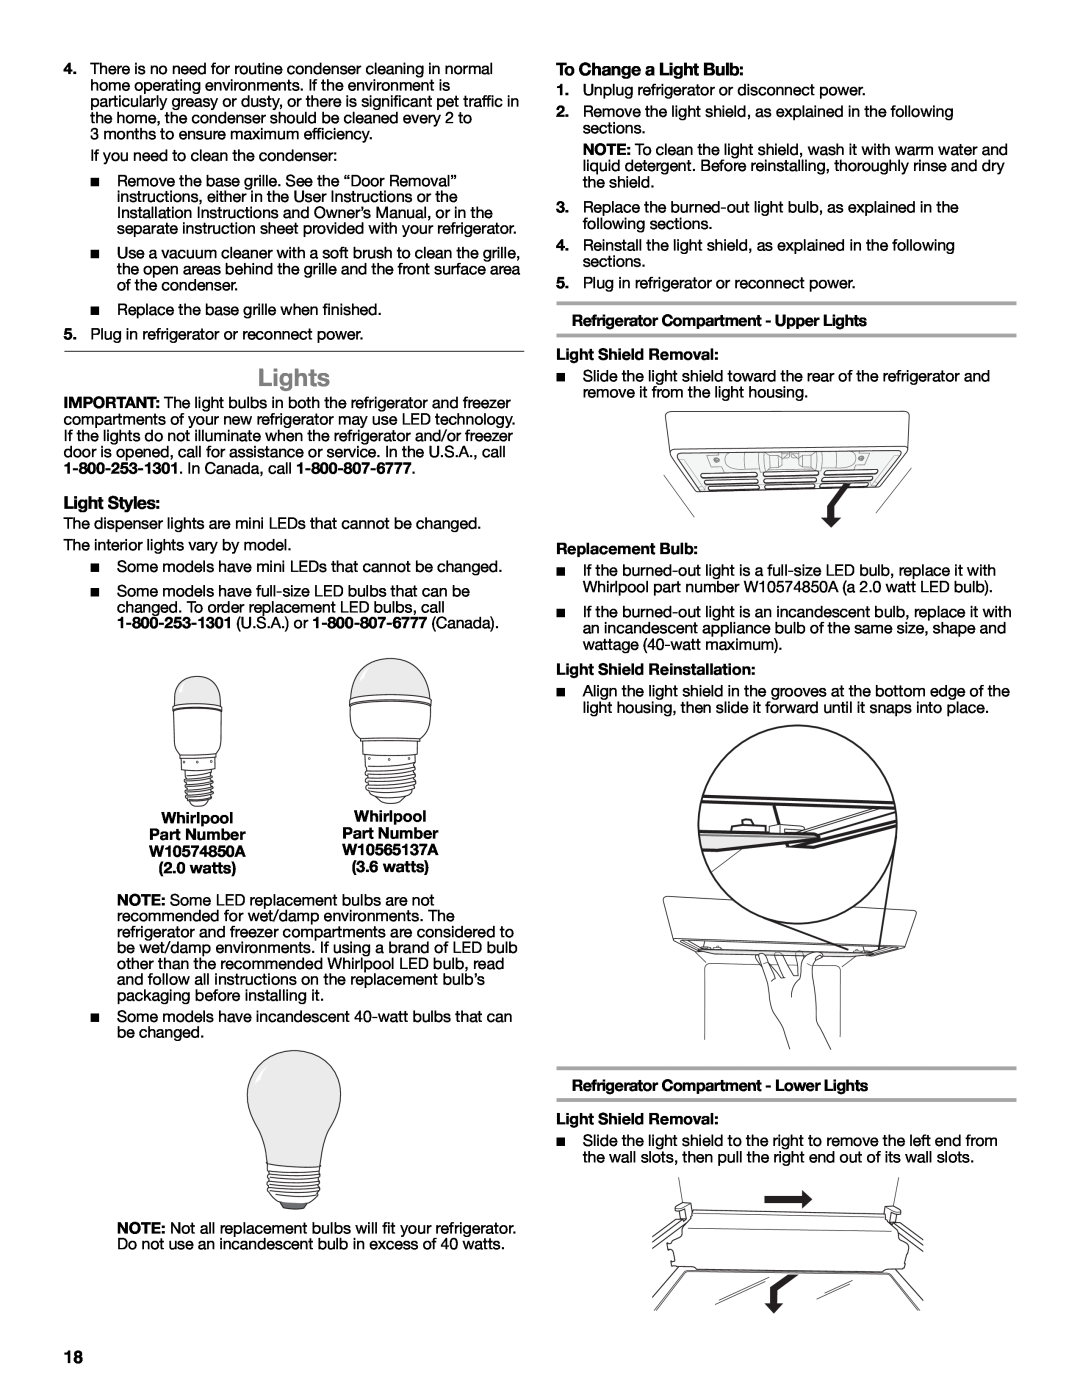 Whirlpool W10632883A installation instructions Lights, Light Styles, To Change a Light Bulb 